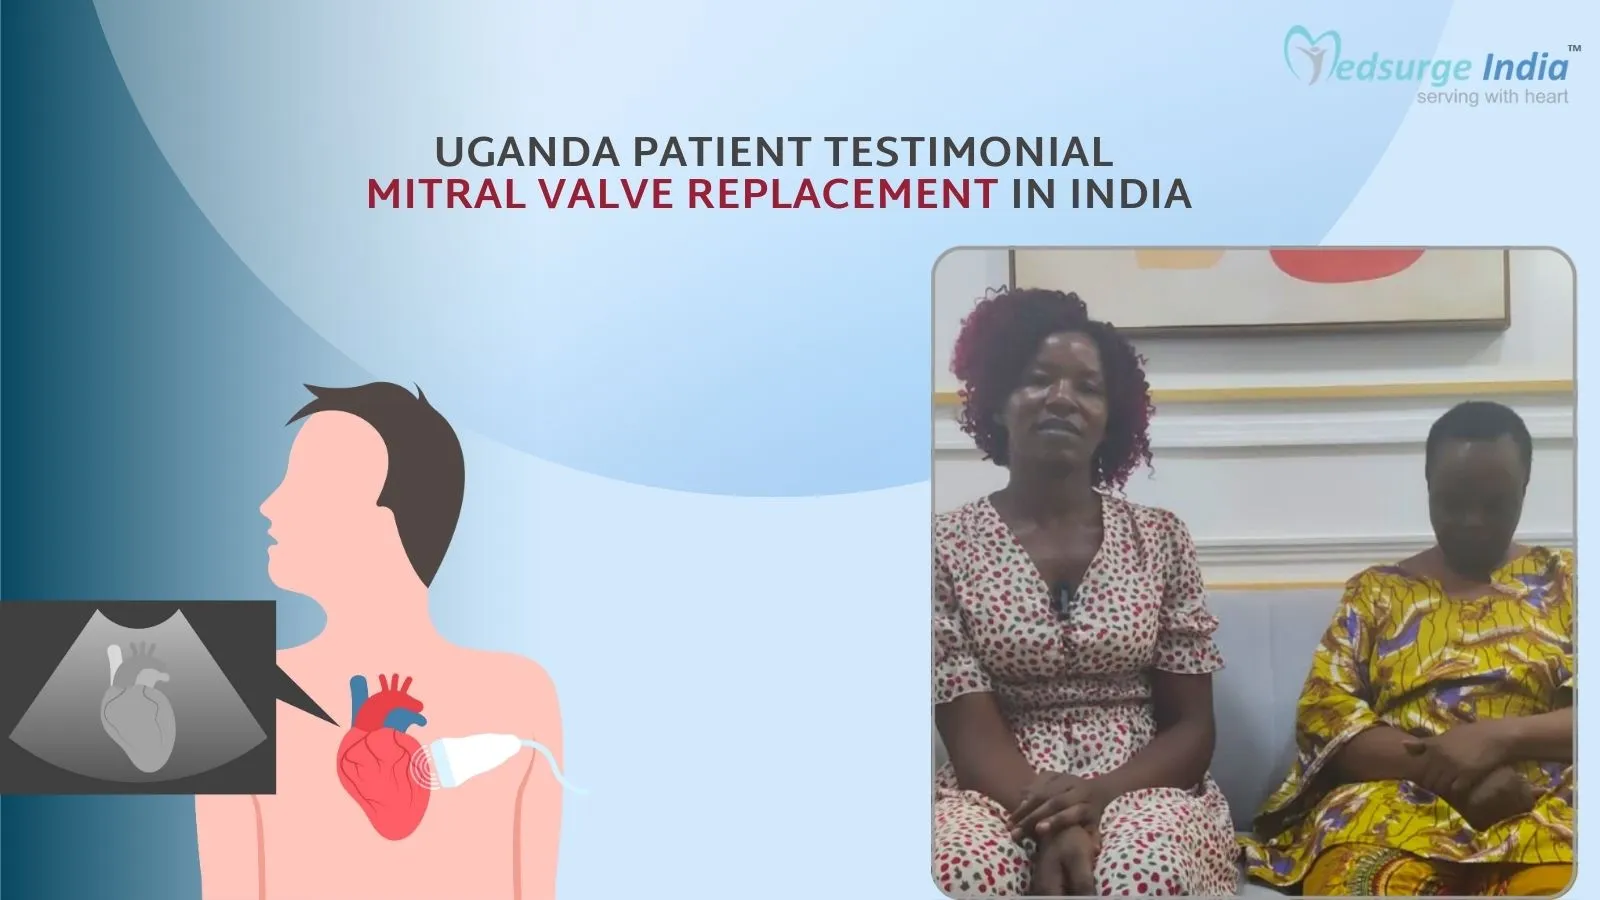 A Life Transformed: From Uganda, Mrs. Namagnada Marget Kampala’s Testimony on Mitral Valve Replacement in India